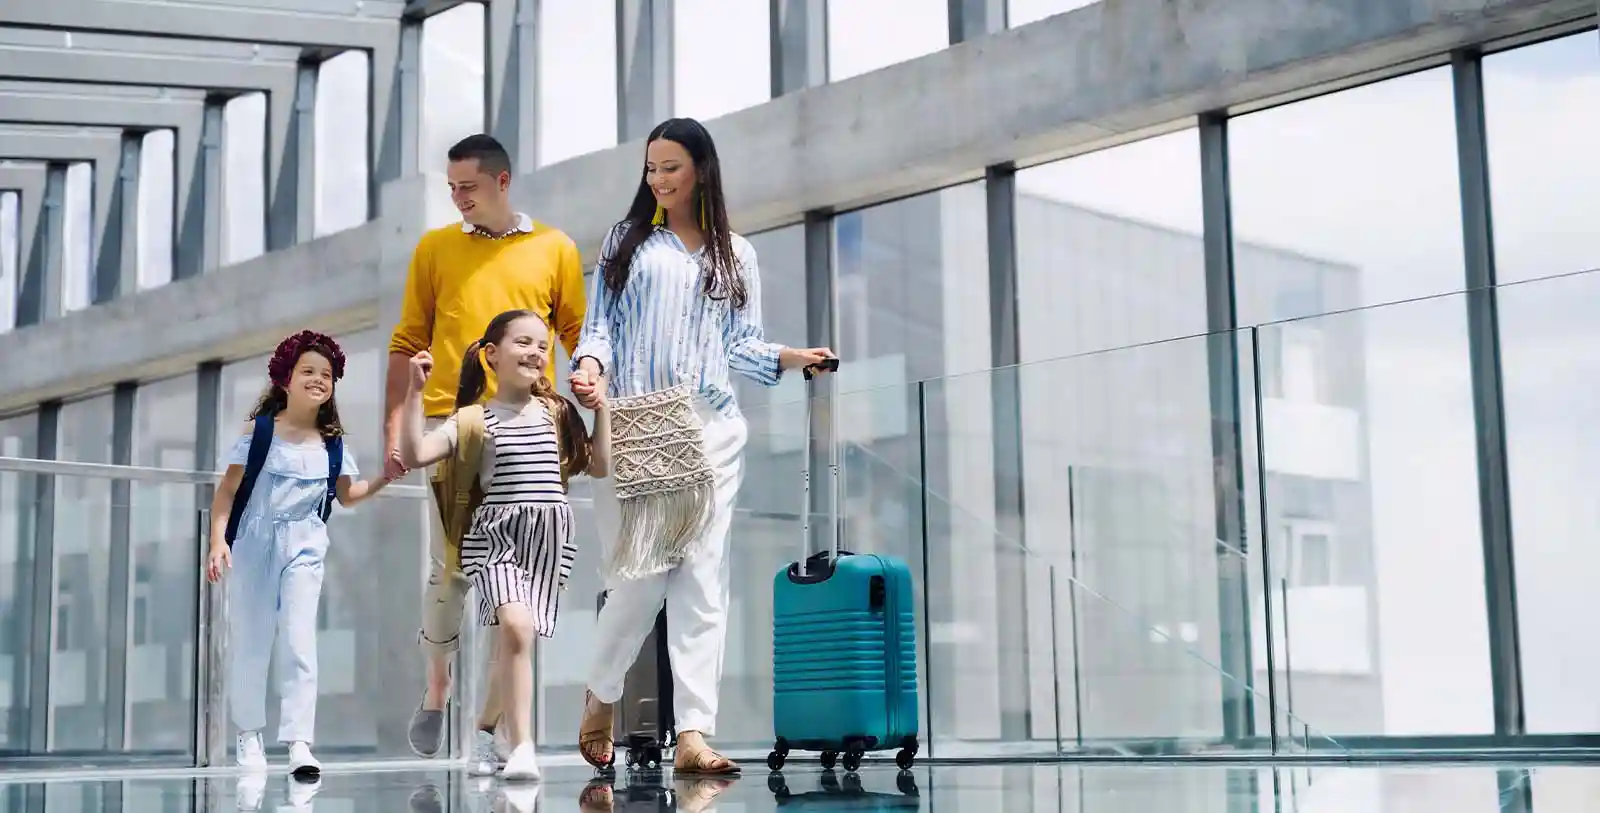 A family flying to Istanbul, the transportation hub of the world